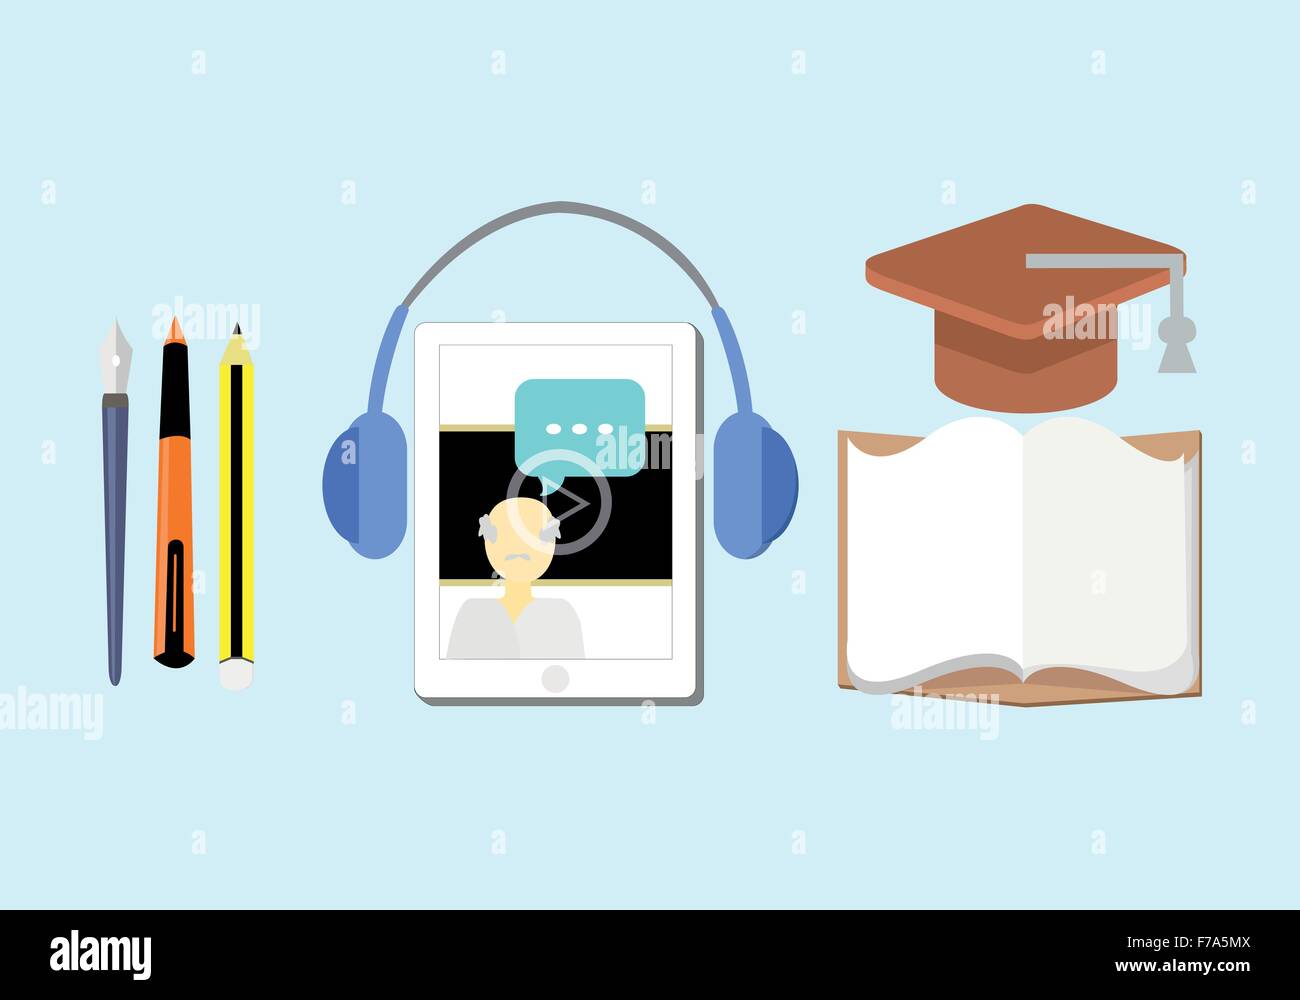 E-learning concept about study with tablet vector illustration Stock Vector